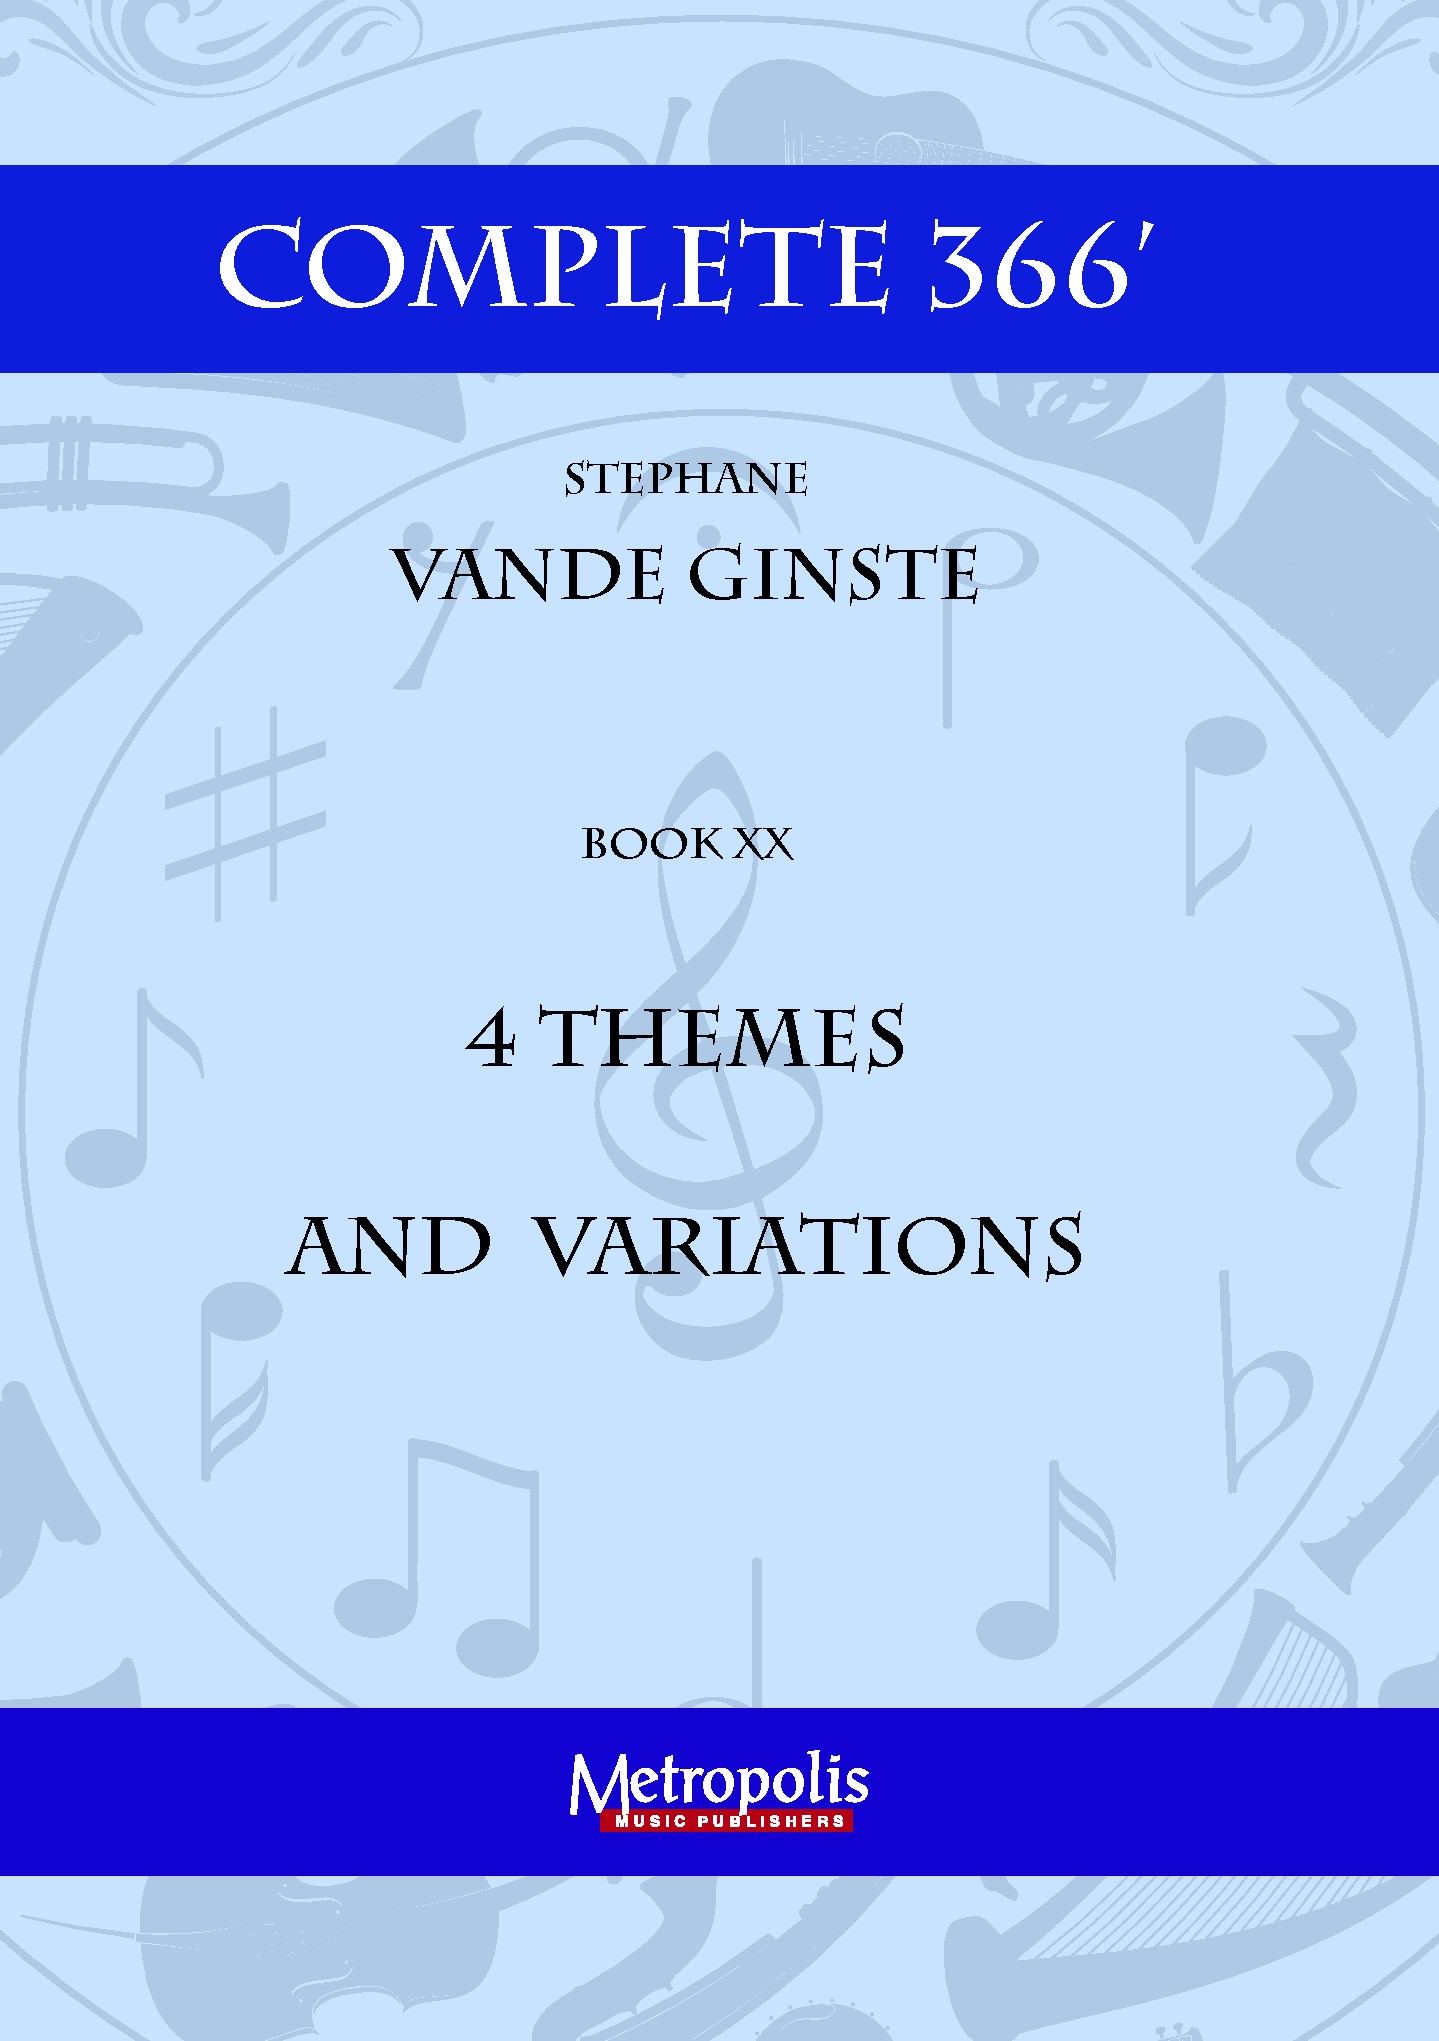 Complete 366 Book Xx: 4 Themes And Variations (VANDE GINSTE STEPHANE)